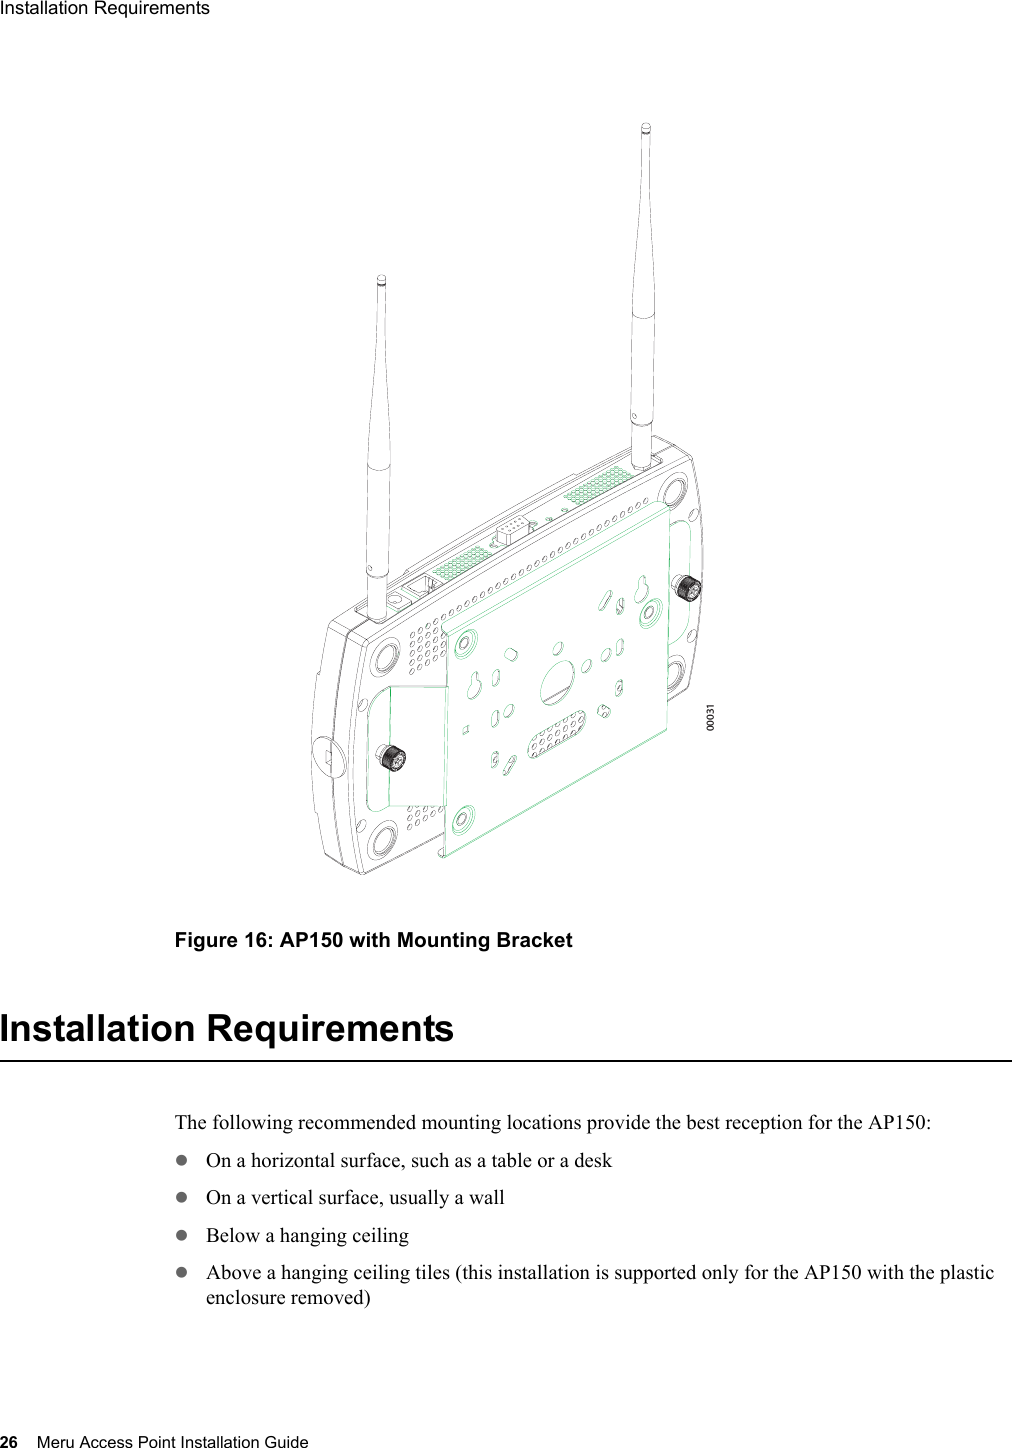 26 Meru Access Point Installation GuideInstallation Requirements Figure 16: AP150 with Mounting BracketInstallation RequirementsThe following recommended mounting locations provide the best reception for the AP150:zOn a horizontal surface, such as a table or a deskzOn a vertical surface, usually a wallzBelow a hanging ceilingzAbove a hanging ceiling tiles (this installation is supported only for the AP150 with the plastic enclosure removed)00031